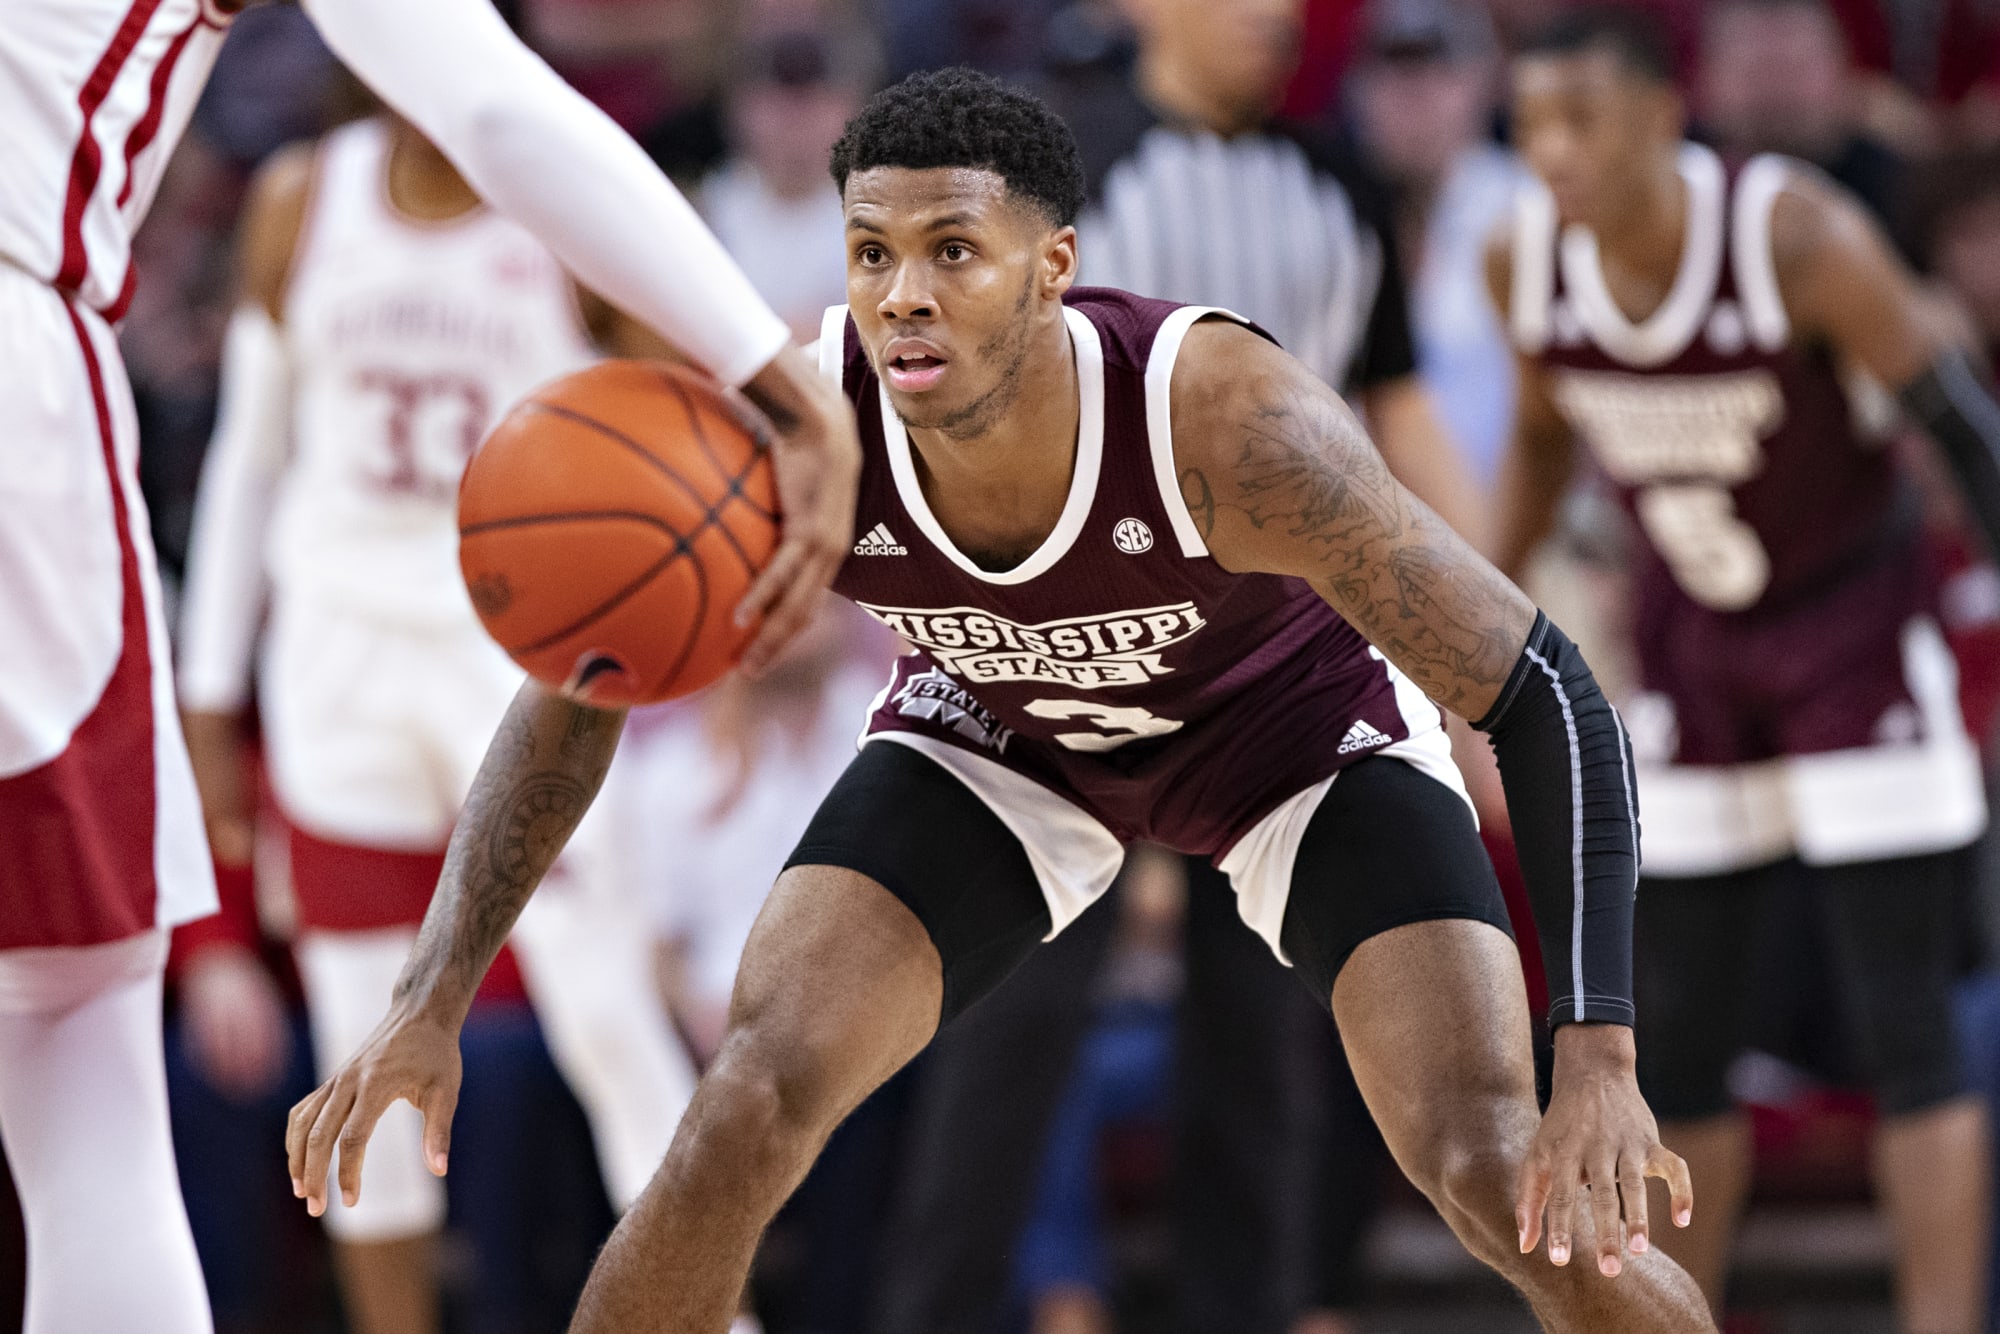 Mississippi State Basketball 2nd Half Comeback Lifts Bulldogs to Victory